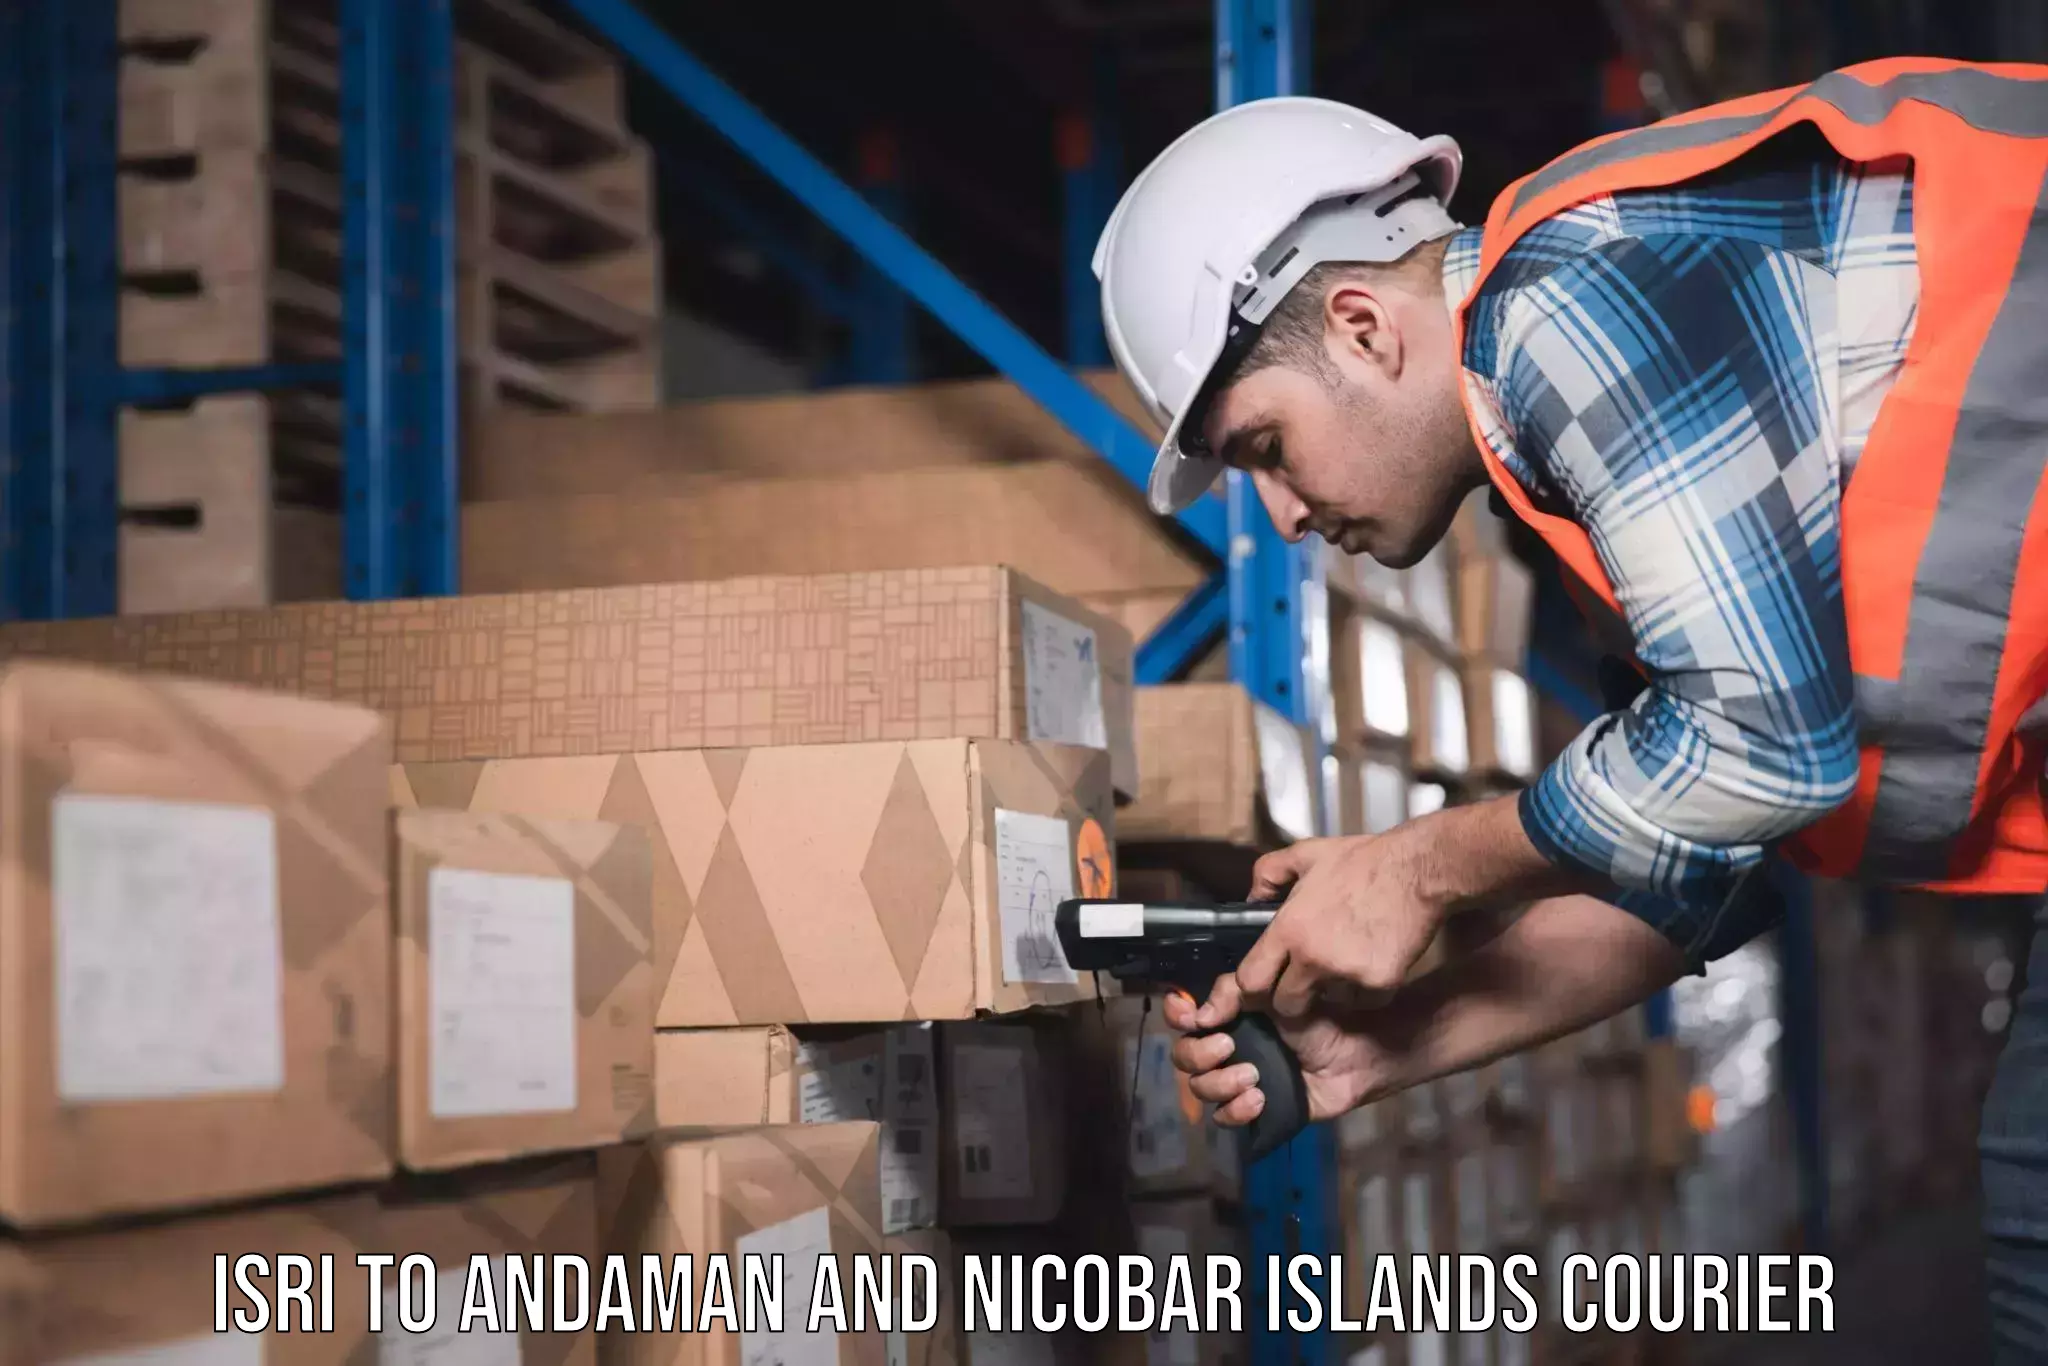 Budget-friendly movers Isri to Andaman and Nicobar Islands